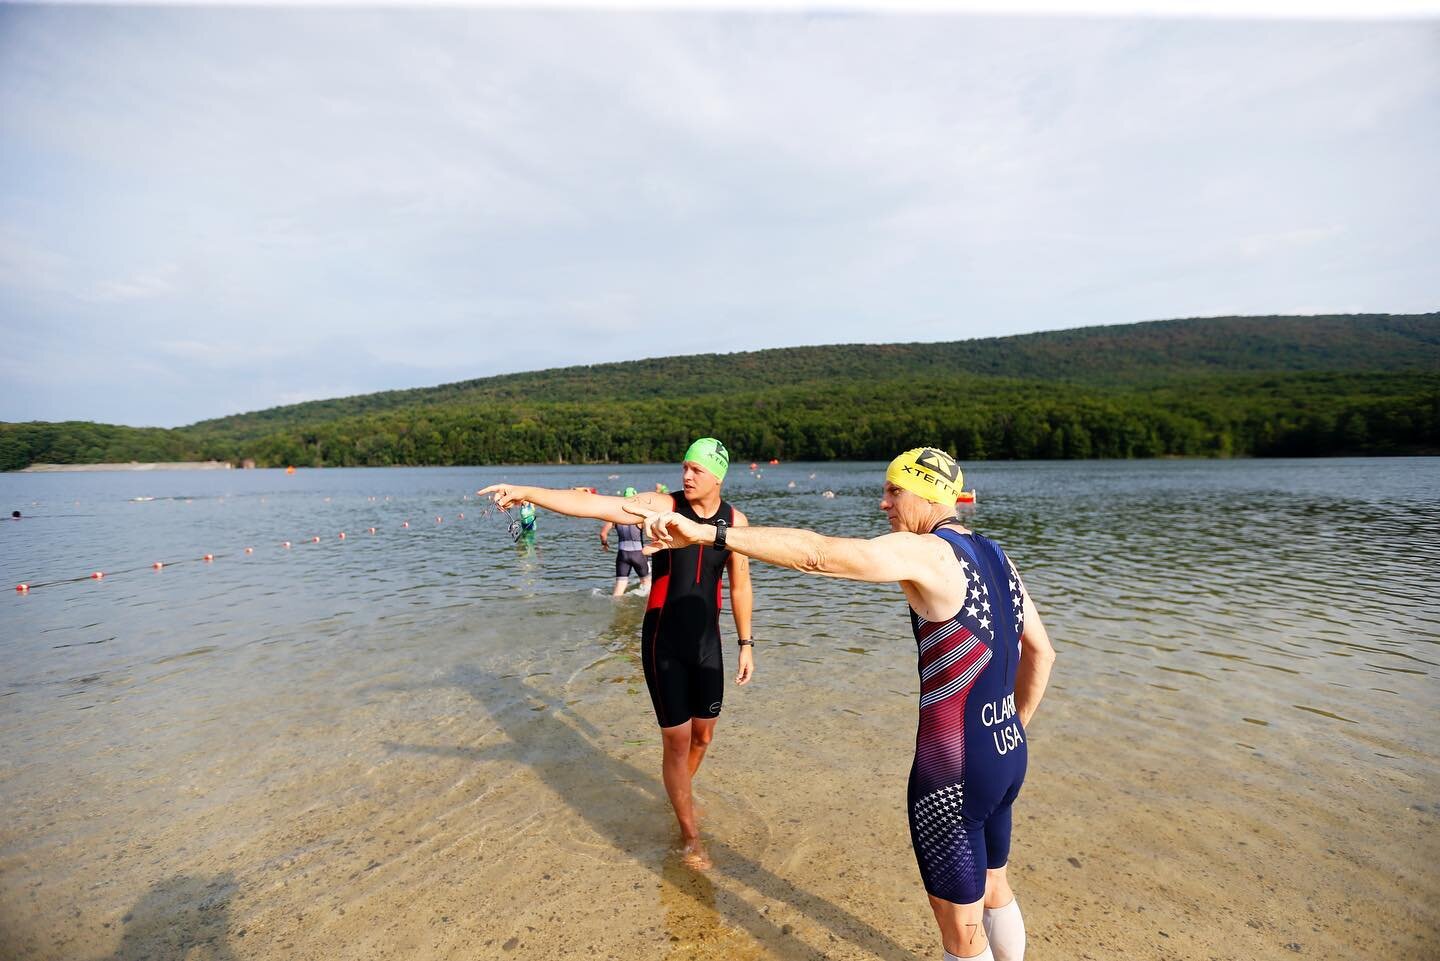 One of my favorite things to photograph at triathlons is people pointing at things so here&rsquo;s a quick selection from yesterday&rsquo;s  @ex2adventures XTERRA EX2 Off-Road Triathlon and Duathlon. Rocky Gap State Park, Flintstone, MD. Sunday, 14 J